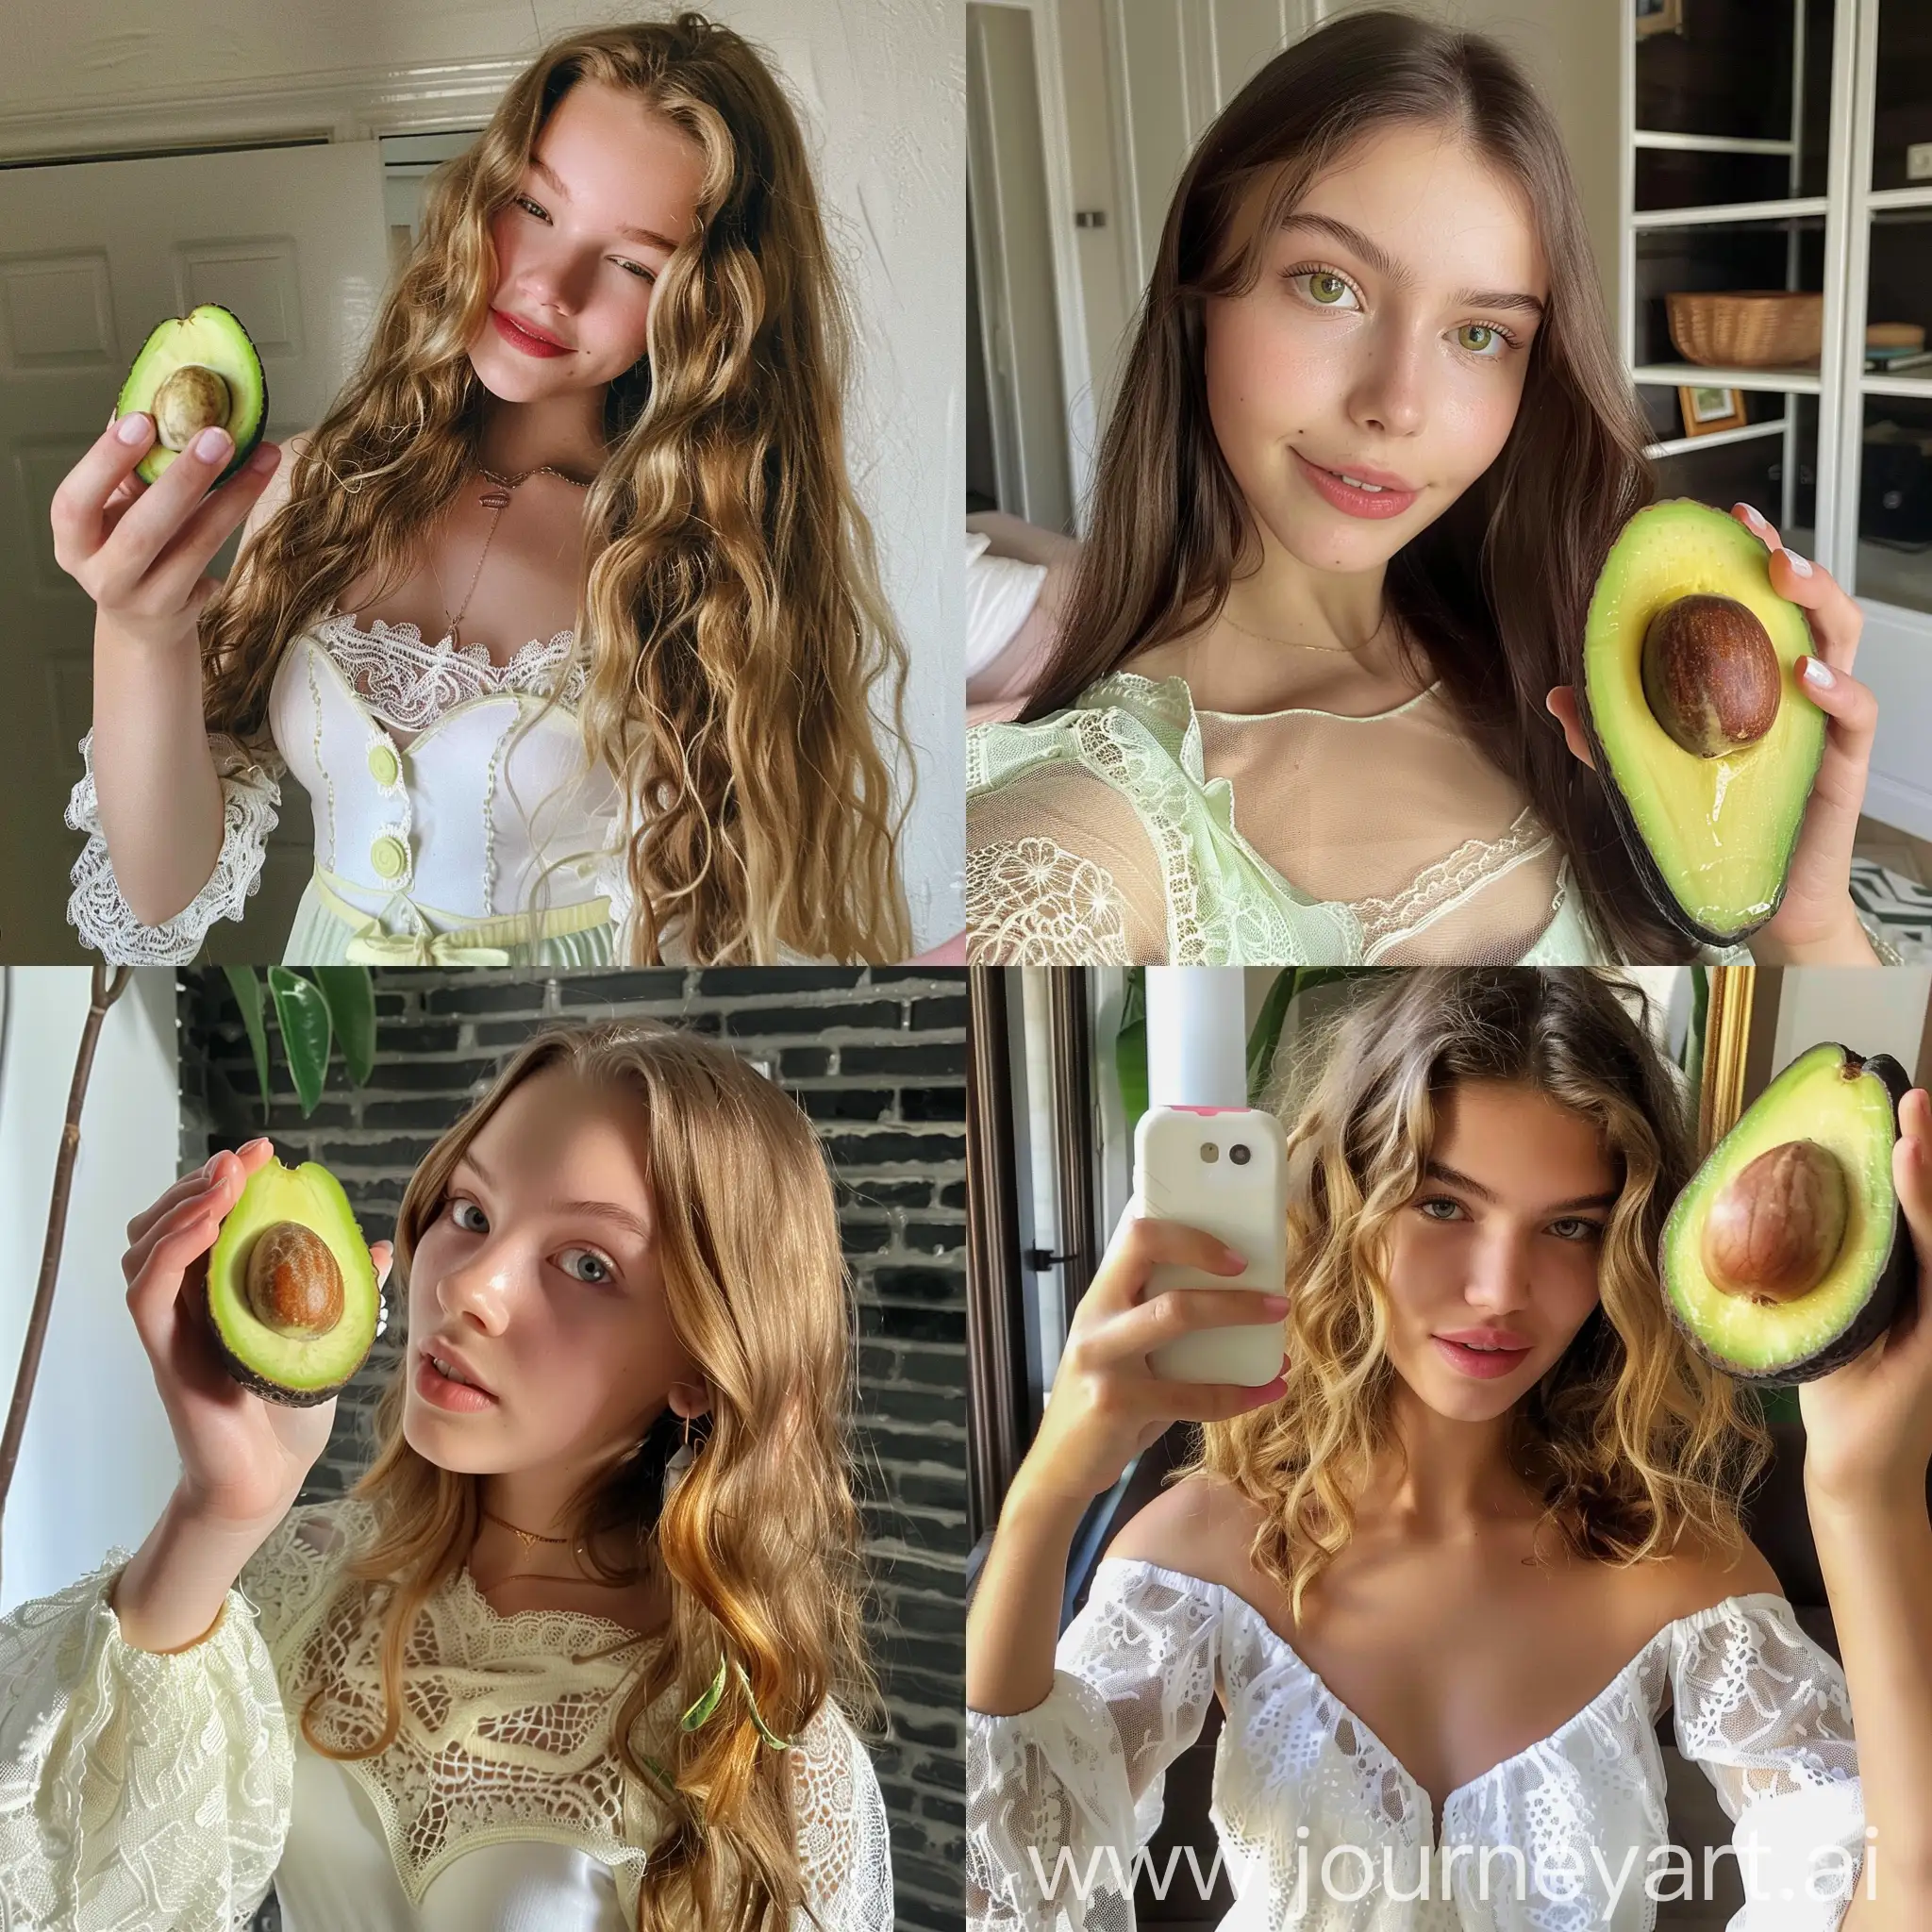 Young-Girl-Sharing-Avocado-in-Stylish-Lace-Influencer-Selfie